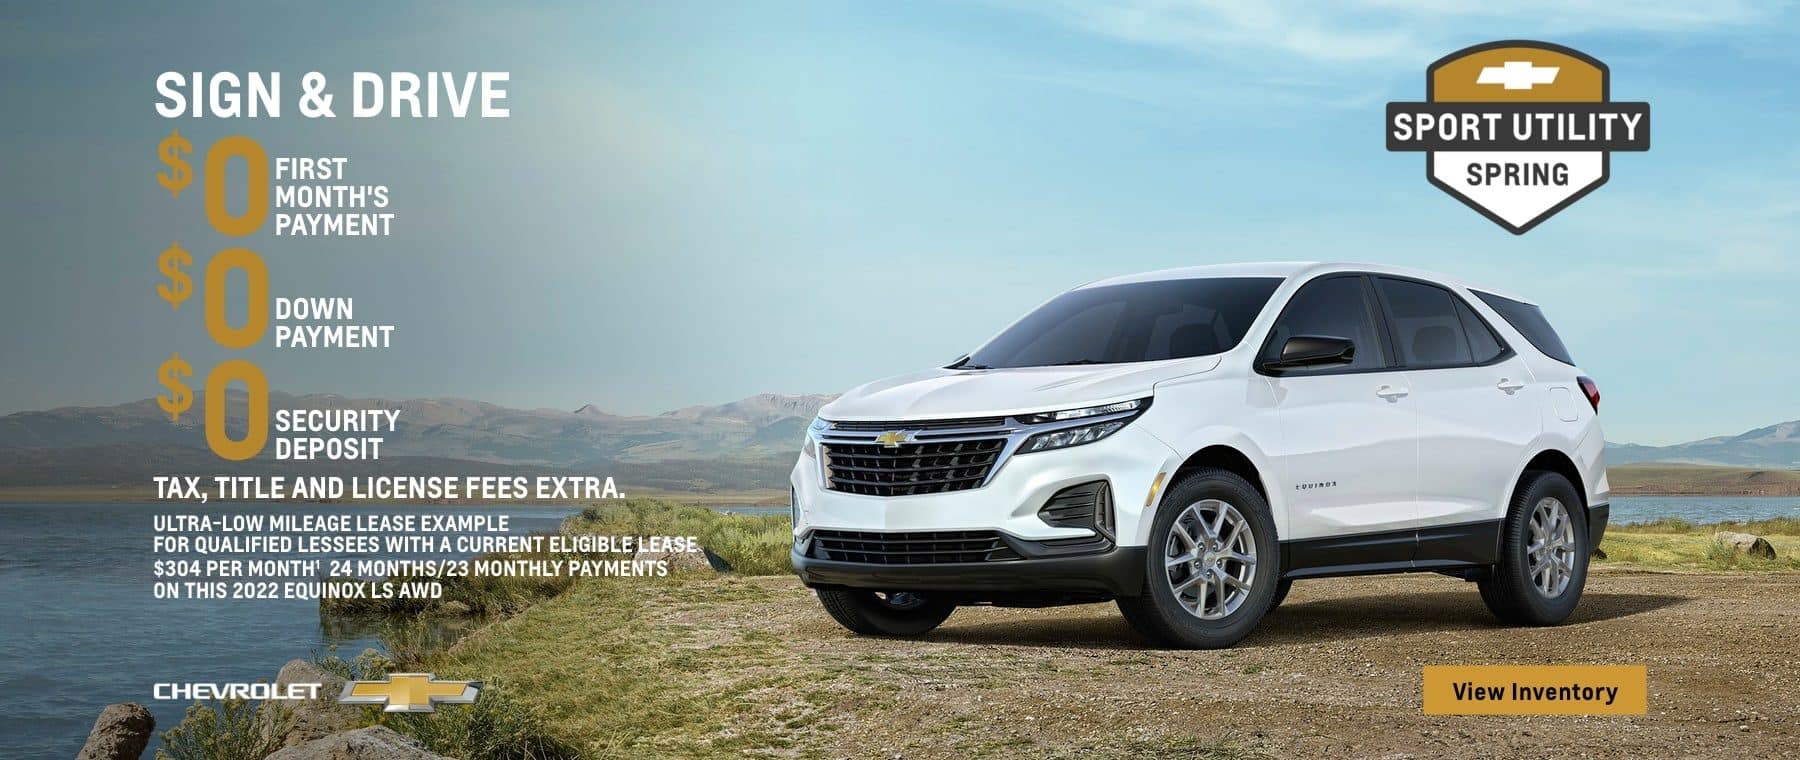 2022 Chevy Equinox LS AWD. Sign & Drive. $0 first month's payment. $0 down payment. $0 security deposit. Tax, title and license fees extra. Ultra-low mileage lease example for qualified lessees with a current eligible lease. $304 per month. 24 months/23 monthly payments on this Equinox LS AWD.